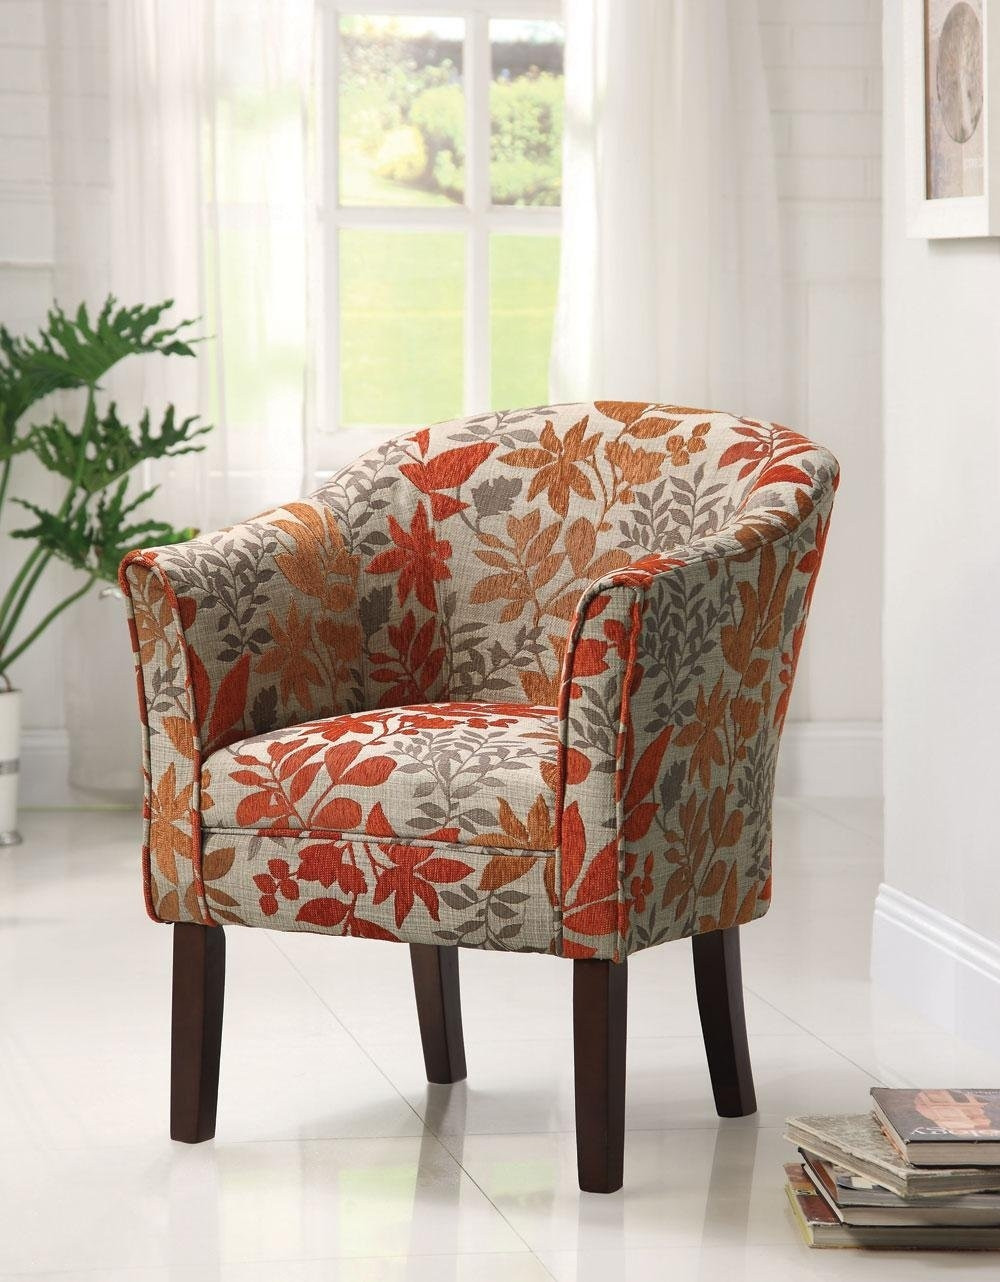 Small Armchairs for Living Room Luxury 15 Armchairs for Small Spaces